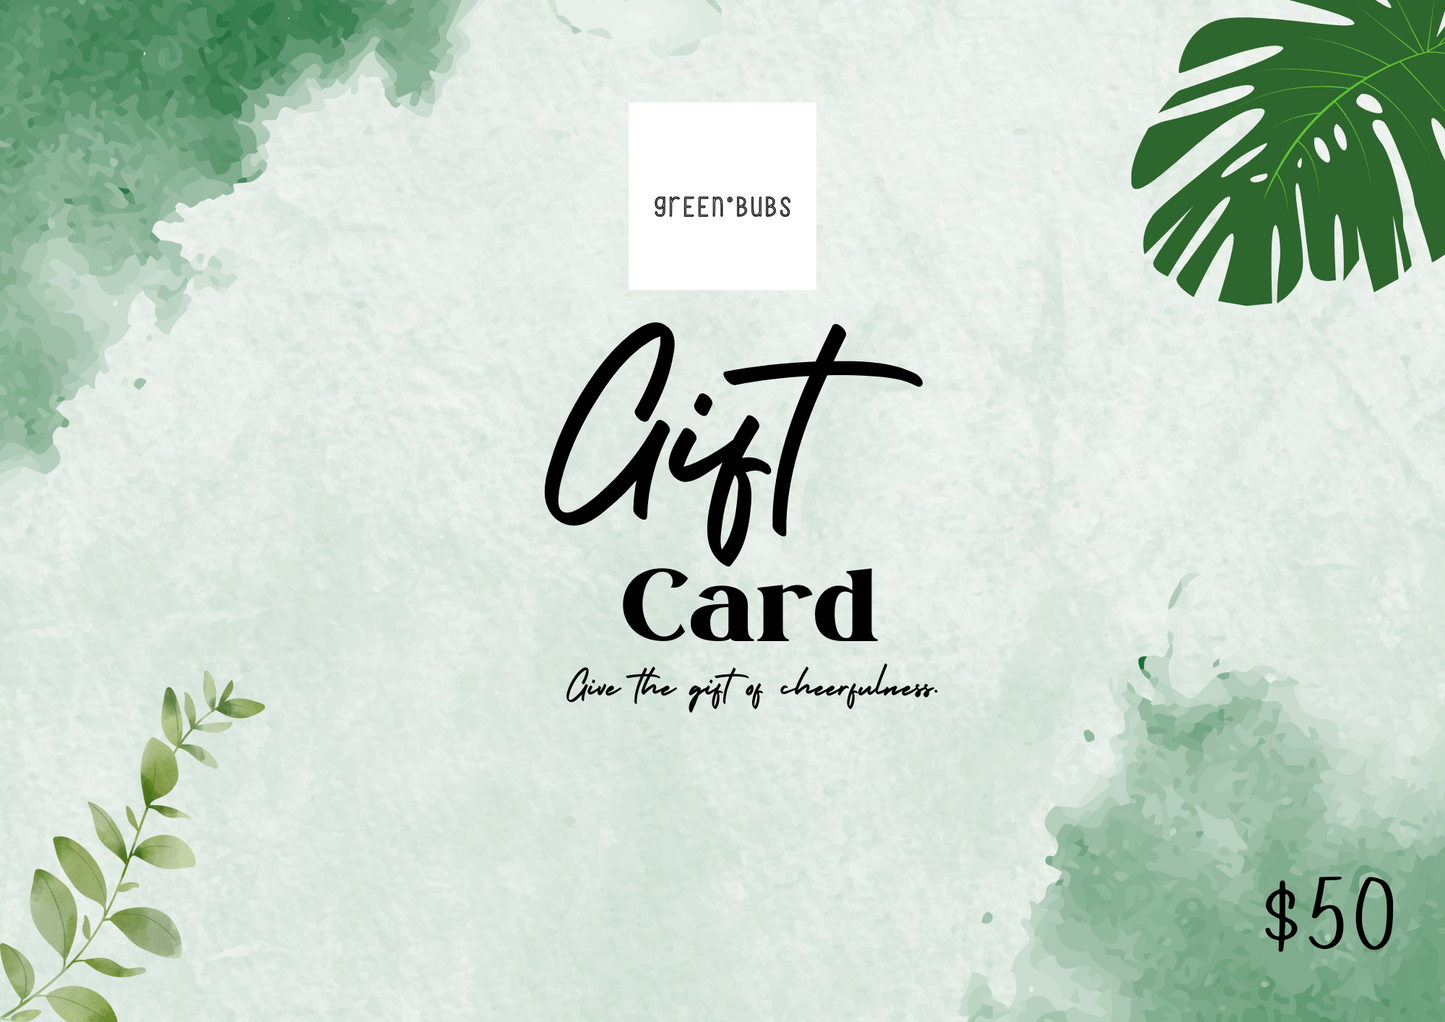 Green Bubs Gift Card $50